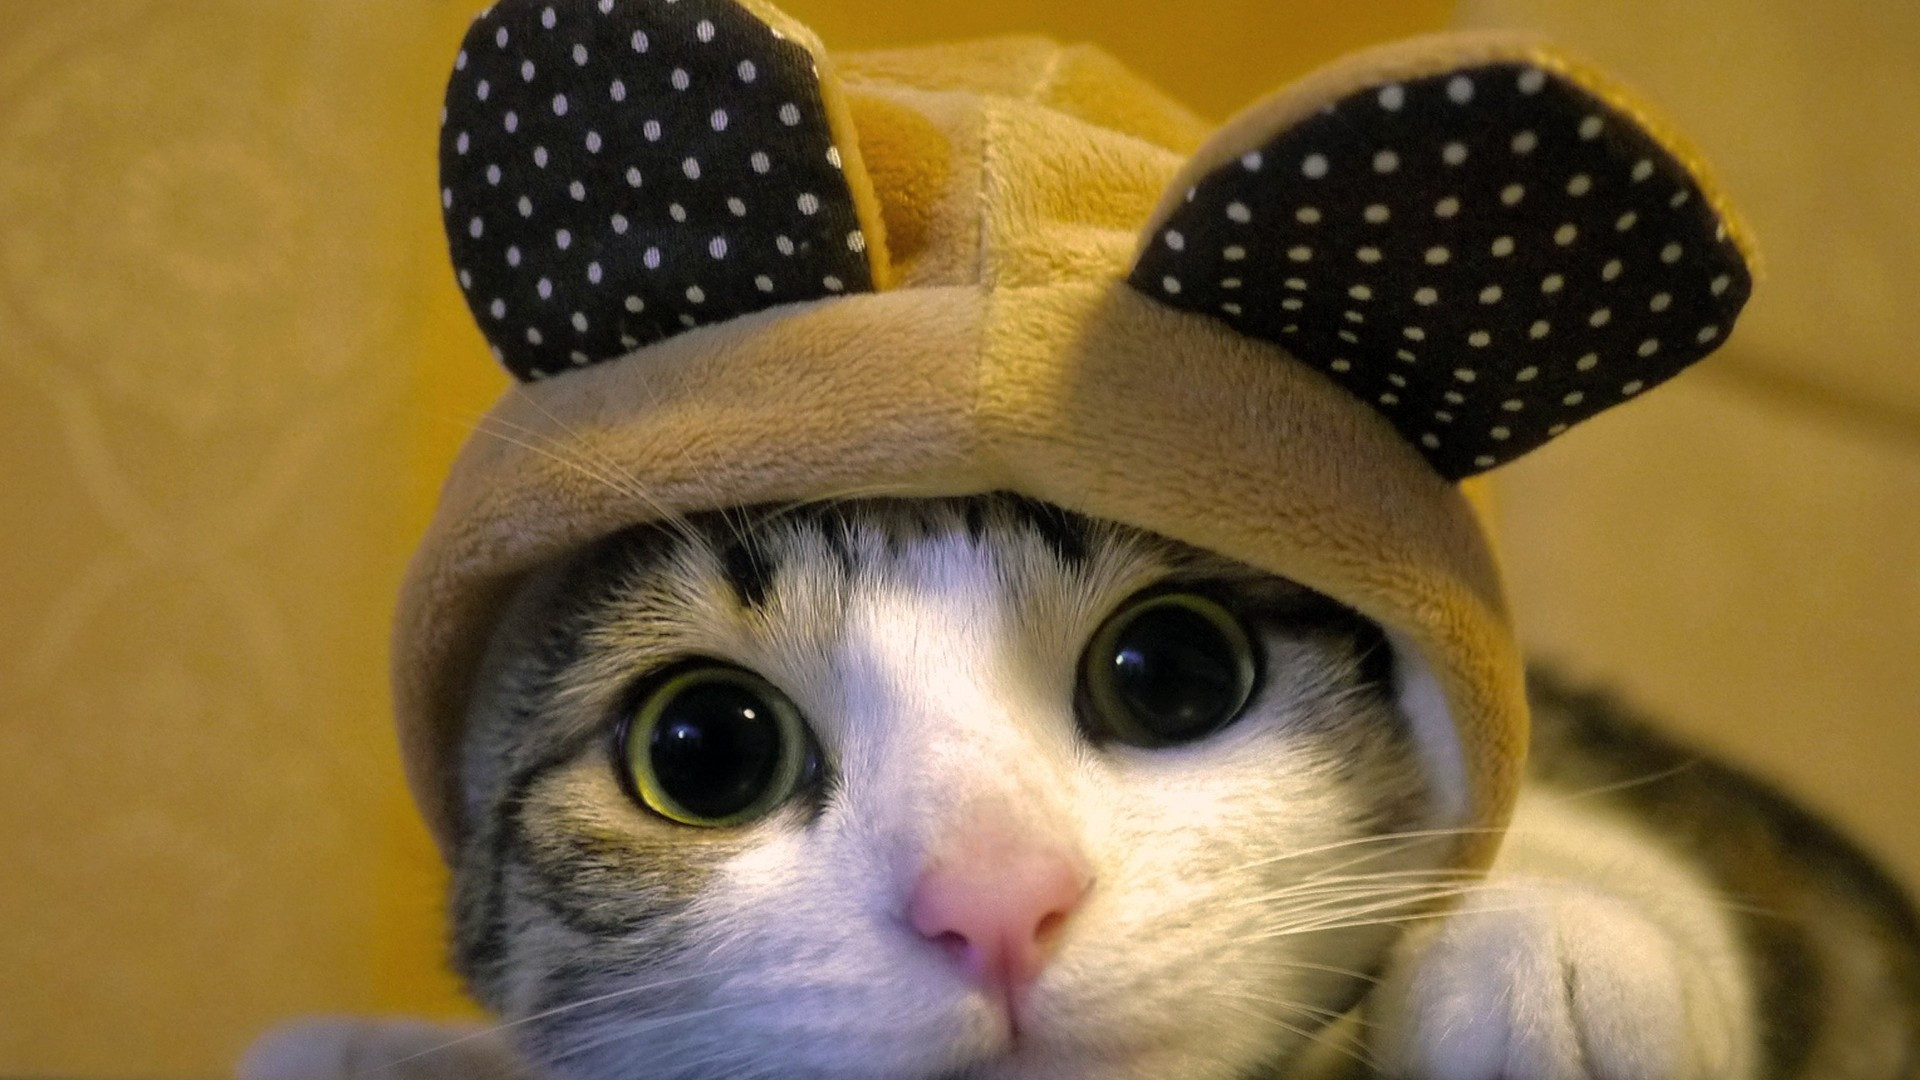 Download 1920x1080 Weird Cat, Looking At Viewer, Hat, Adorable, Cats Wallpaper for Widescreen